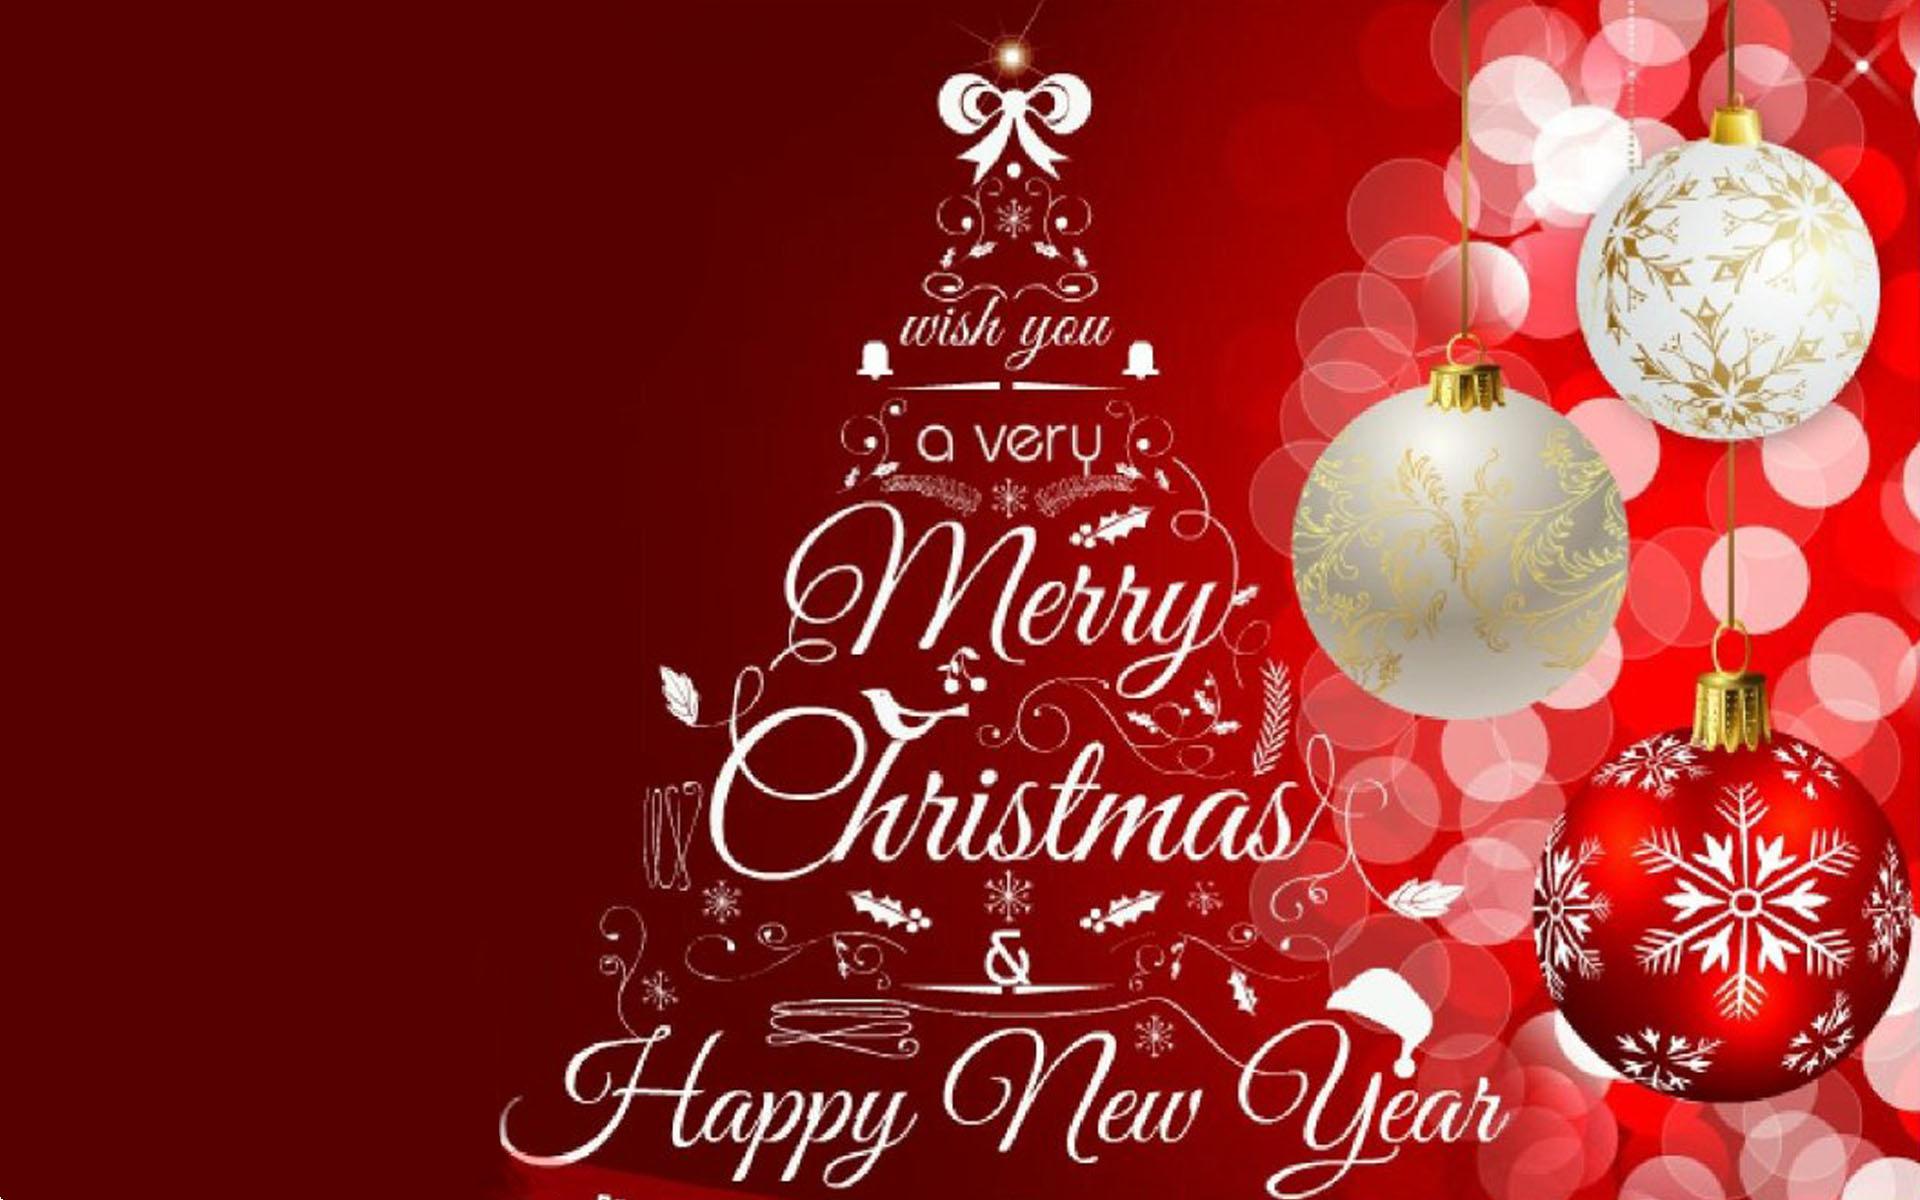 Merry Christmas And Happy New Year 2021 Images